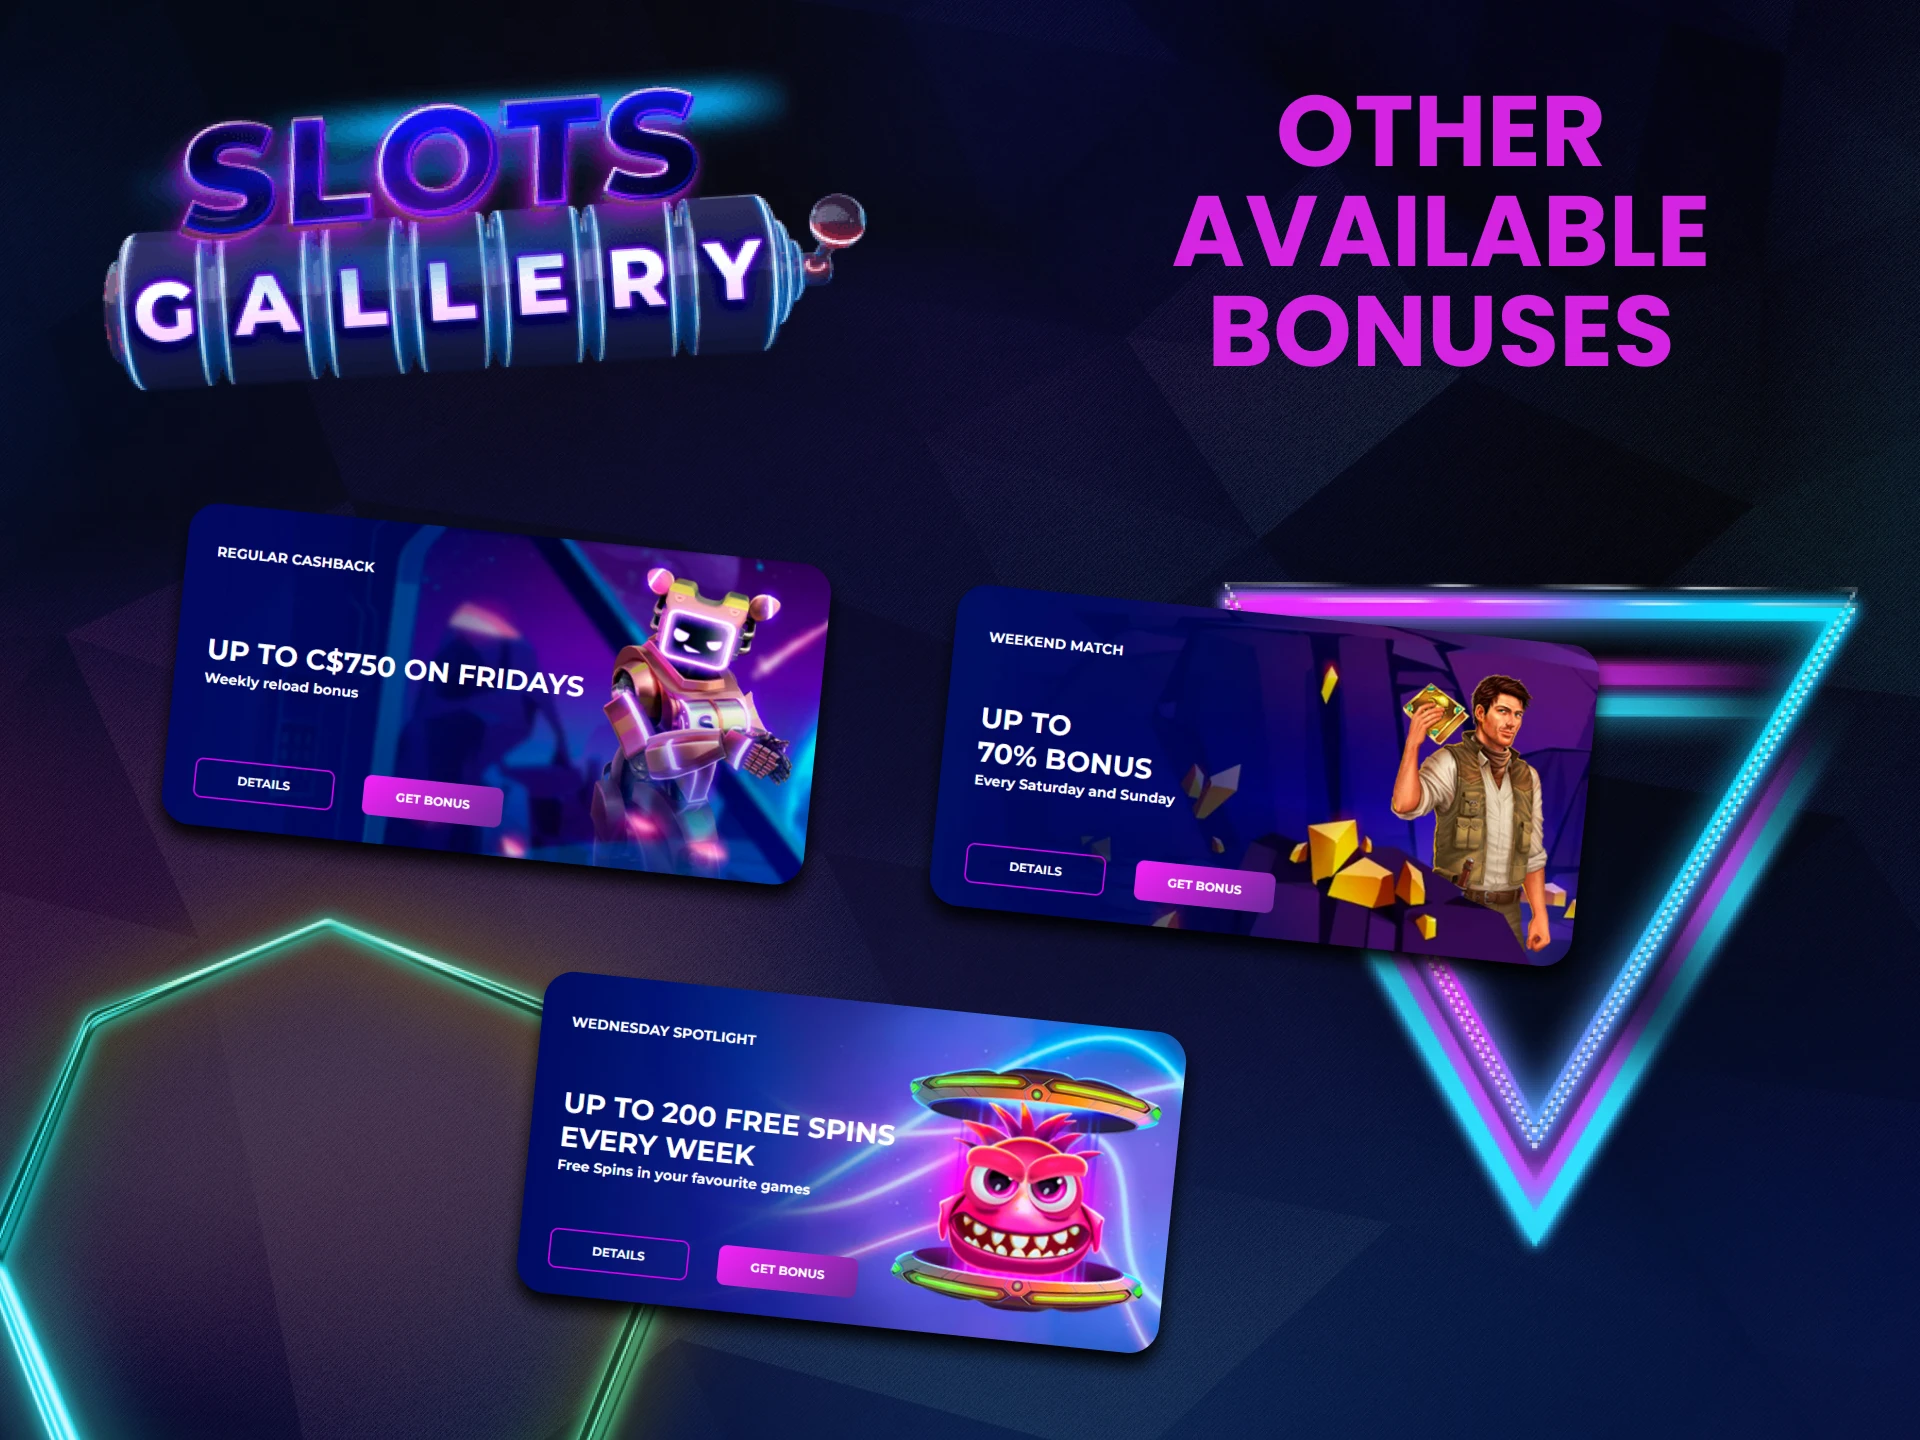 Use bonuses from Slots Gallery.